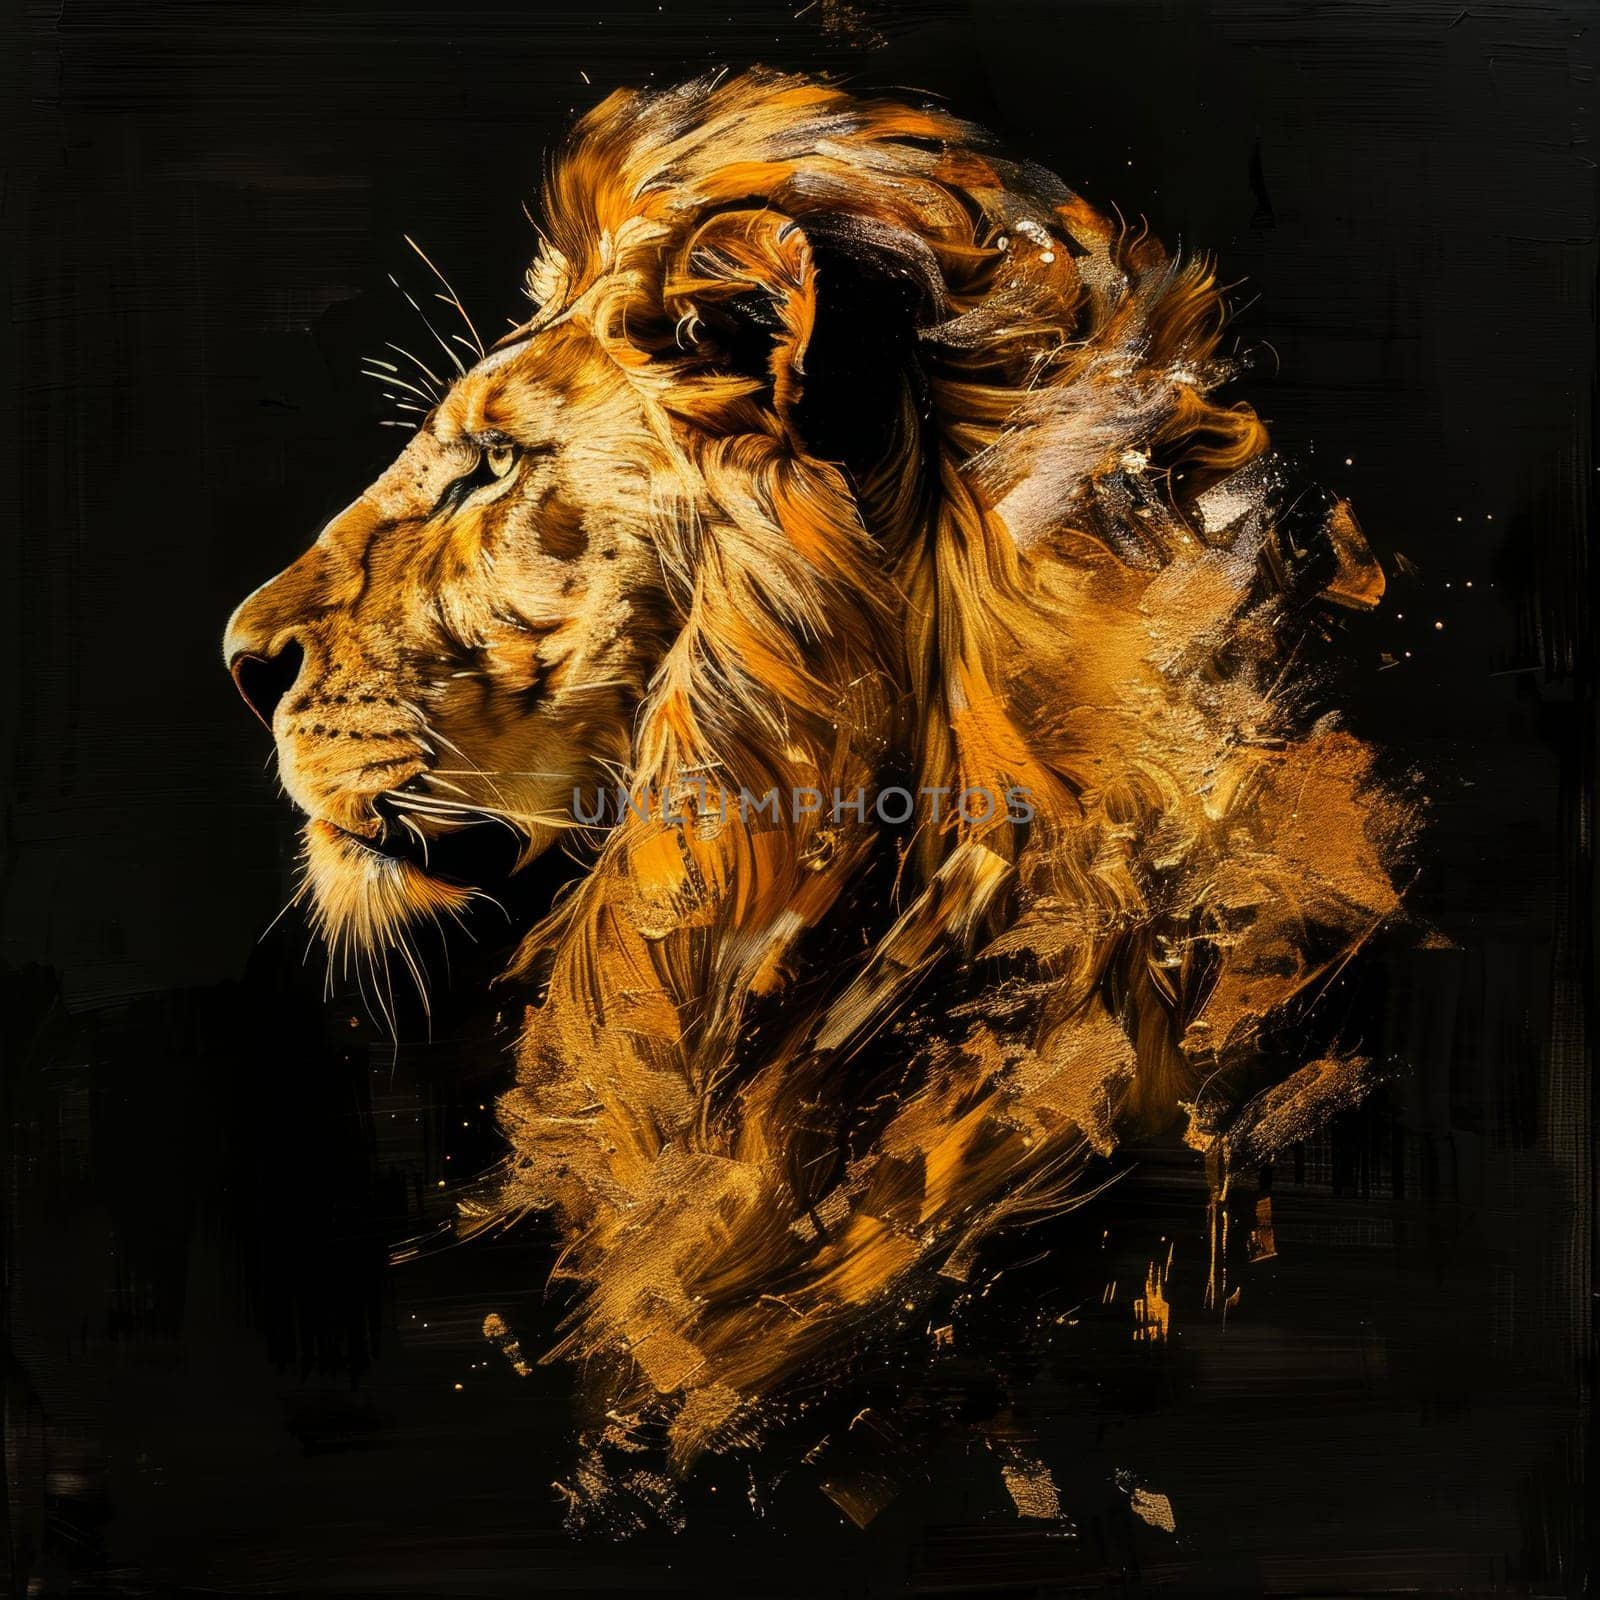 portrait of a lion's head on a black background. The illustration by Lobachad